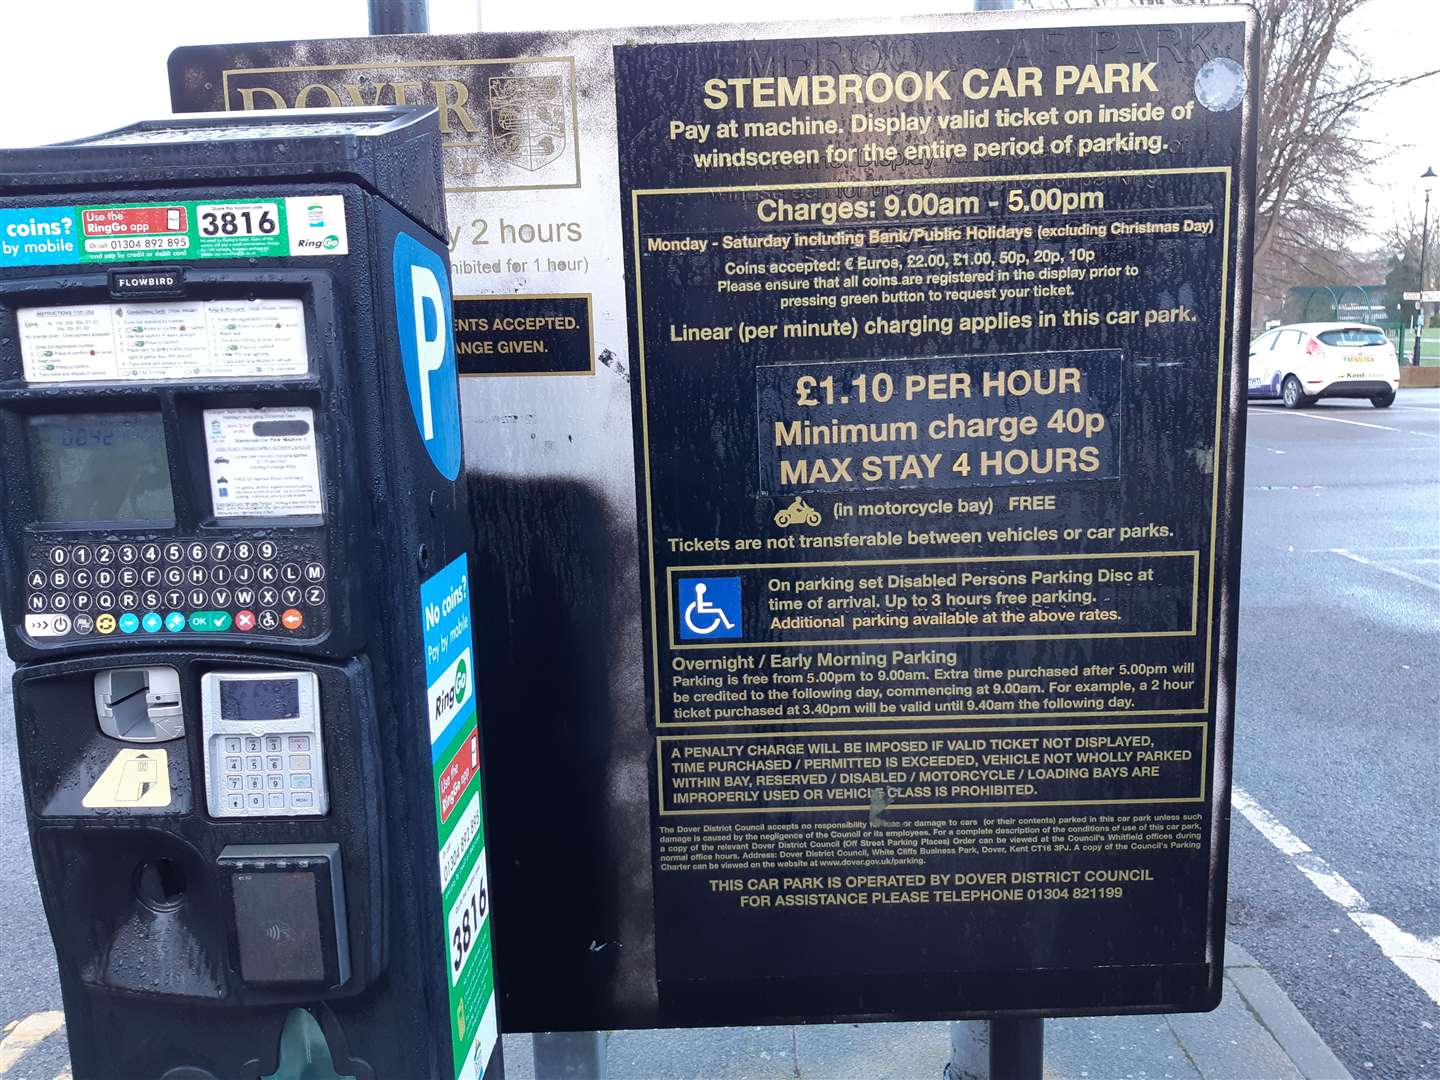 The existing charges for the Stembrook car park in Dover